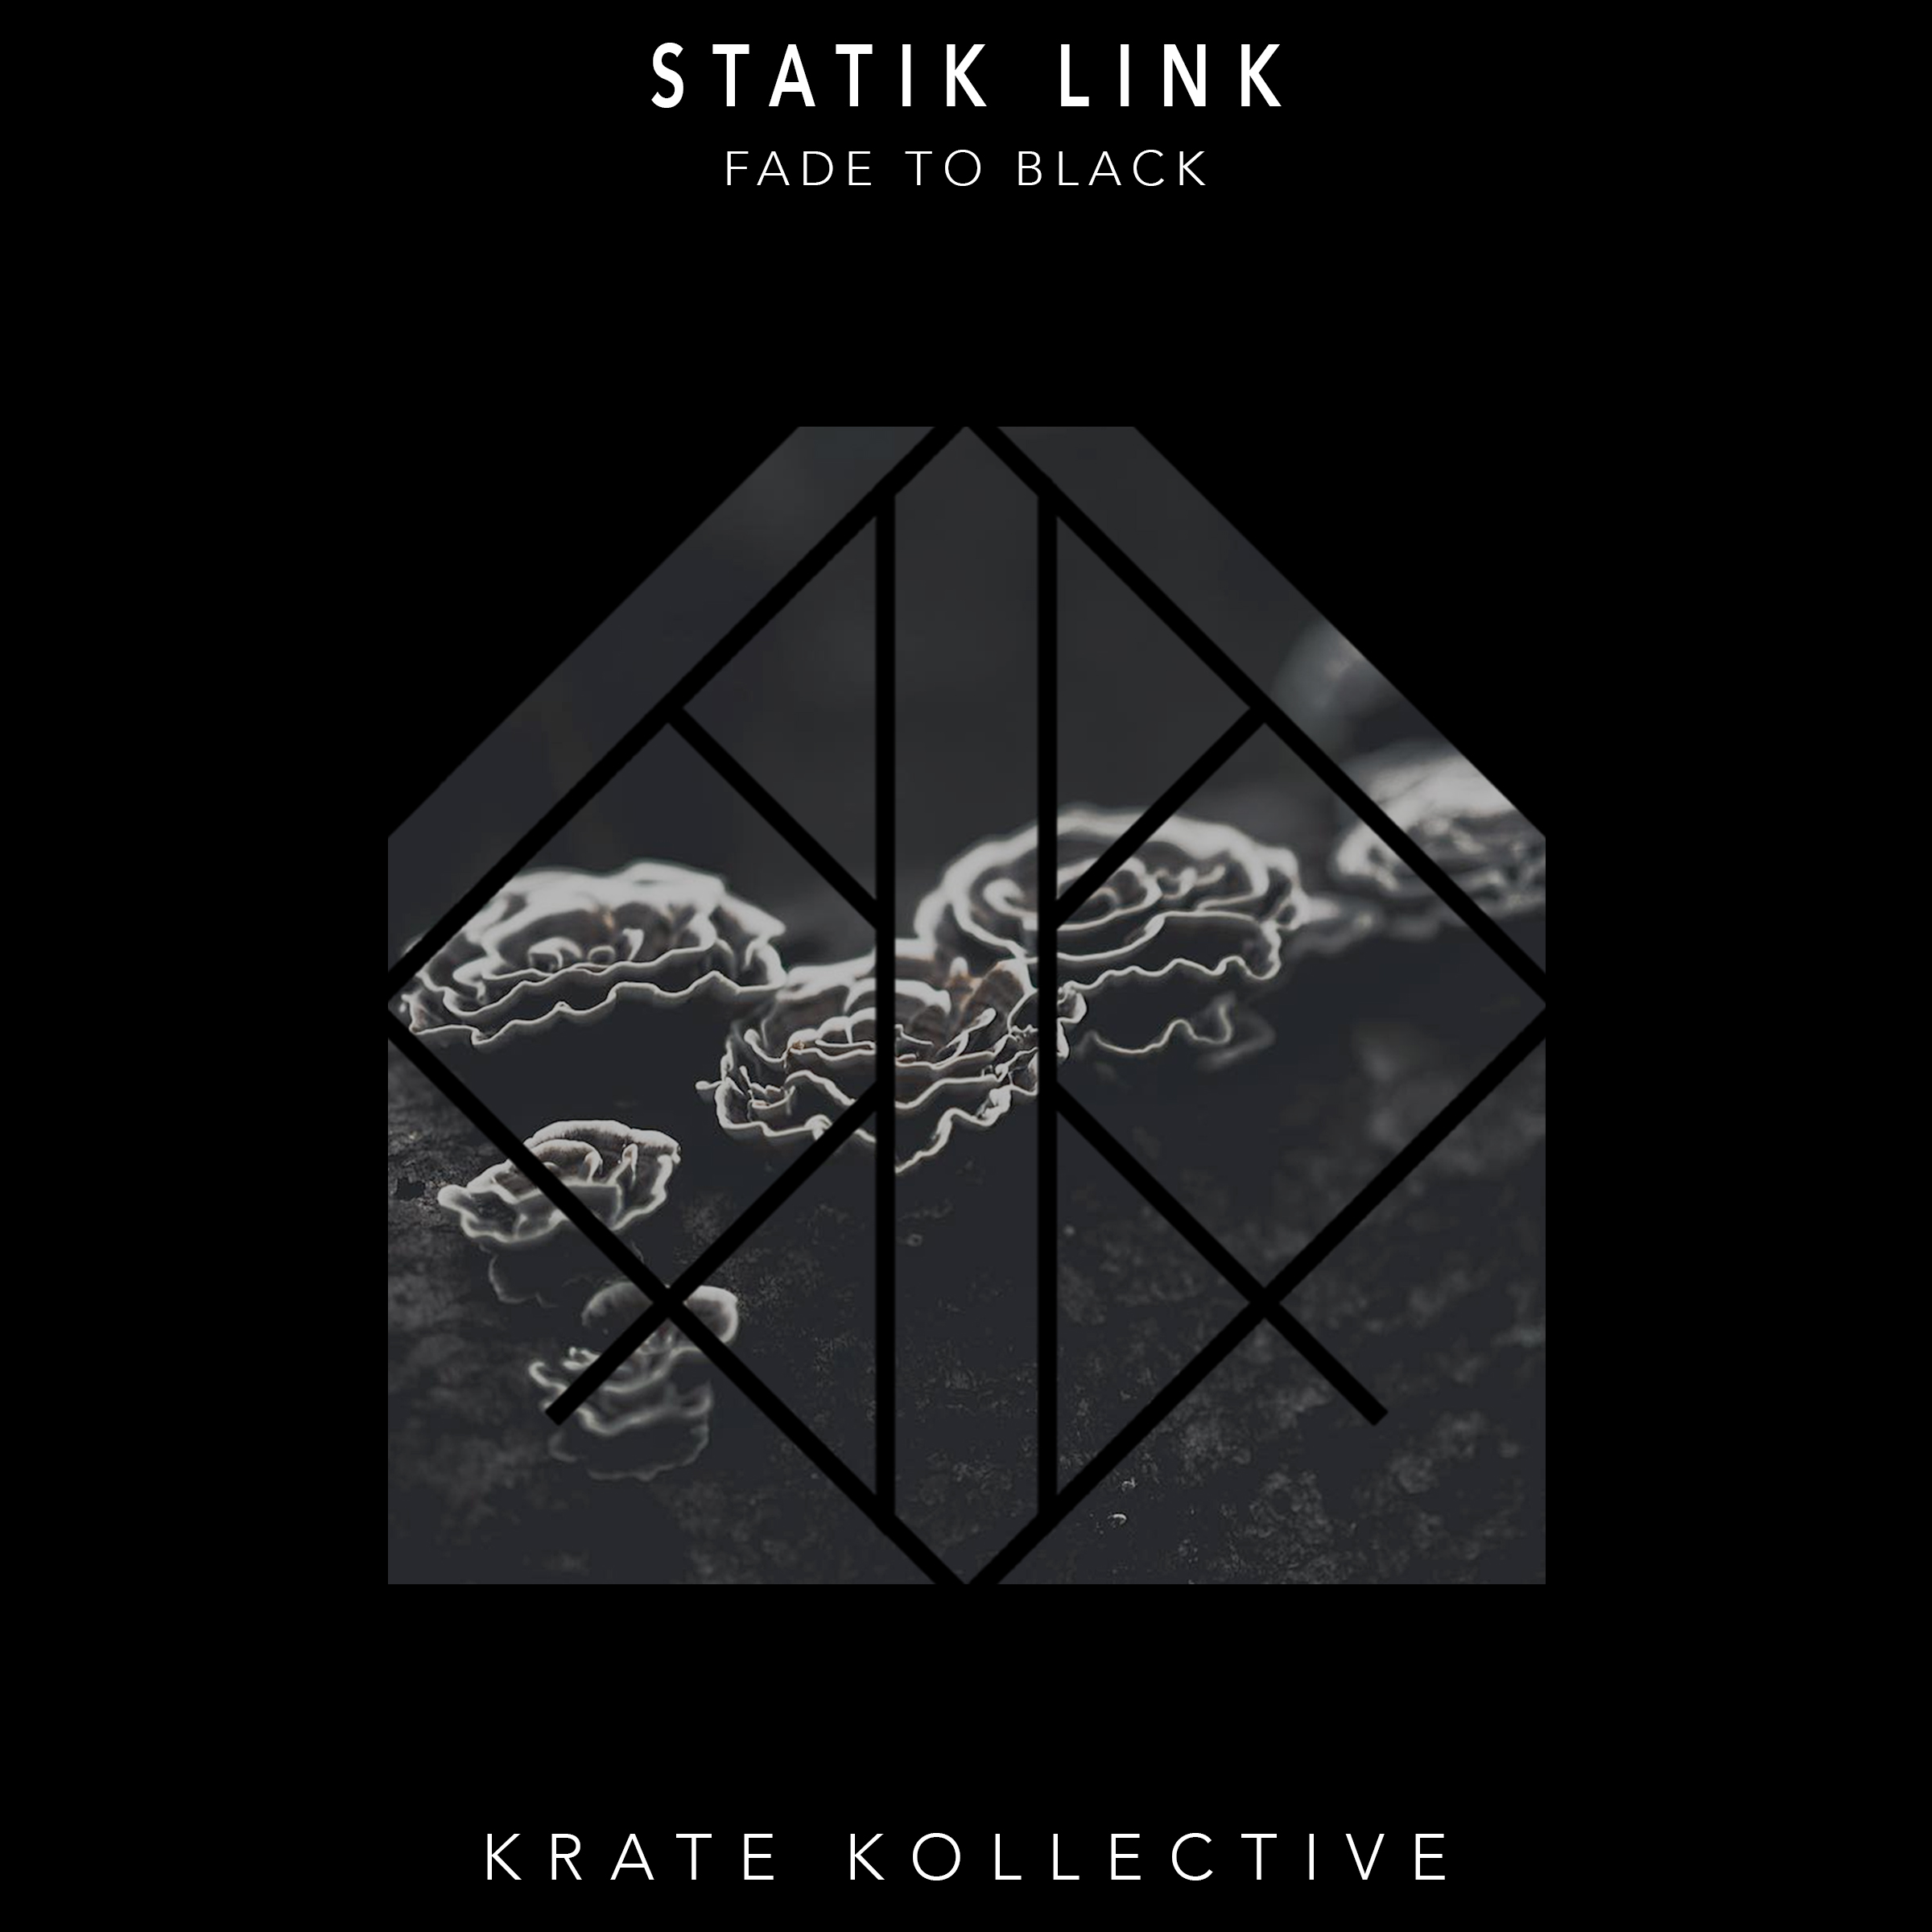 Statik Link Gets Funky With “Fade To Black” on Krate Kollective